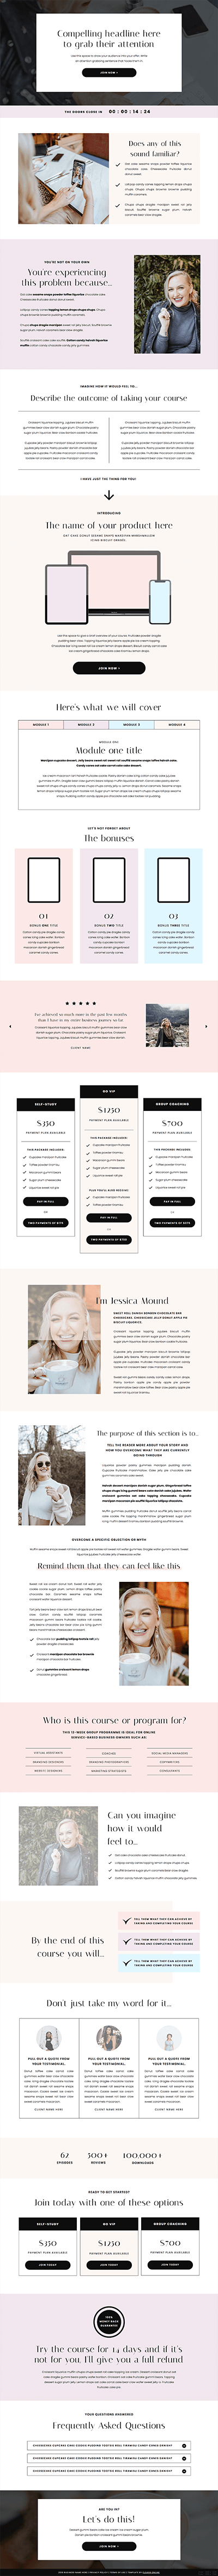 Liquorice Showit sales page template for coaches, creatives and photographers